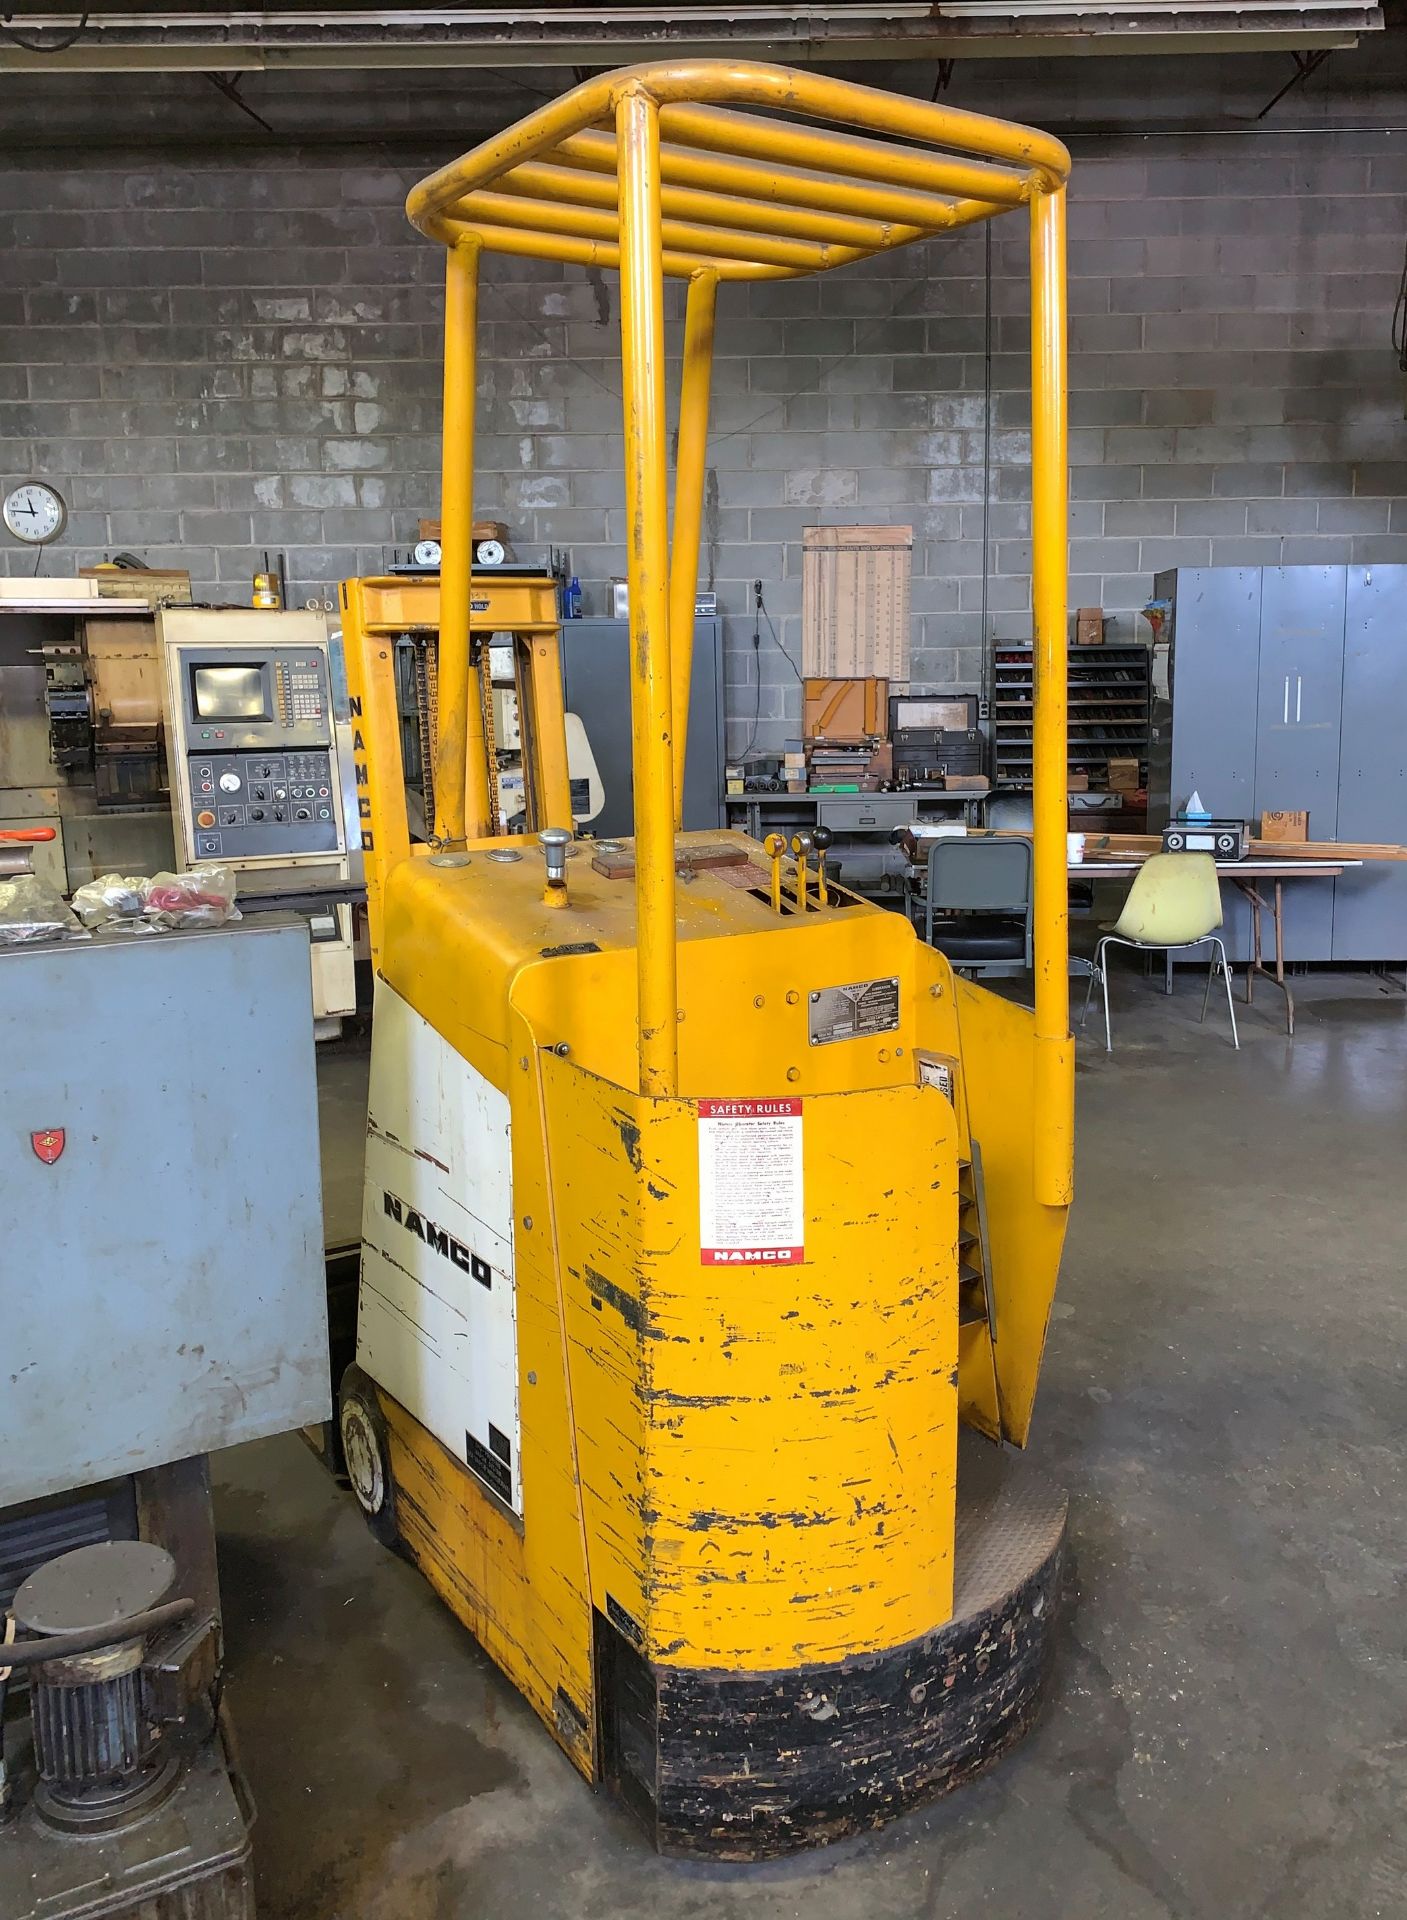 Namco Mdl. 2015 Fork Lift, 2000Lb Capacity, 15" Load Center (Located in Levittown, PA Facility) - Image 3 of 6